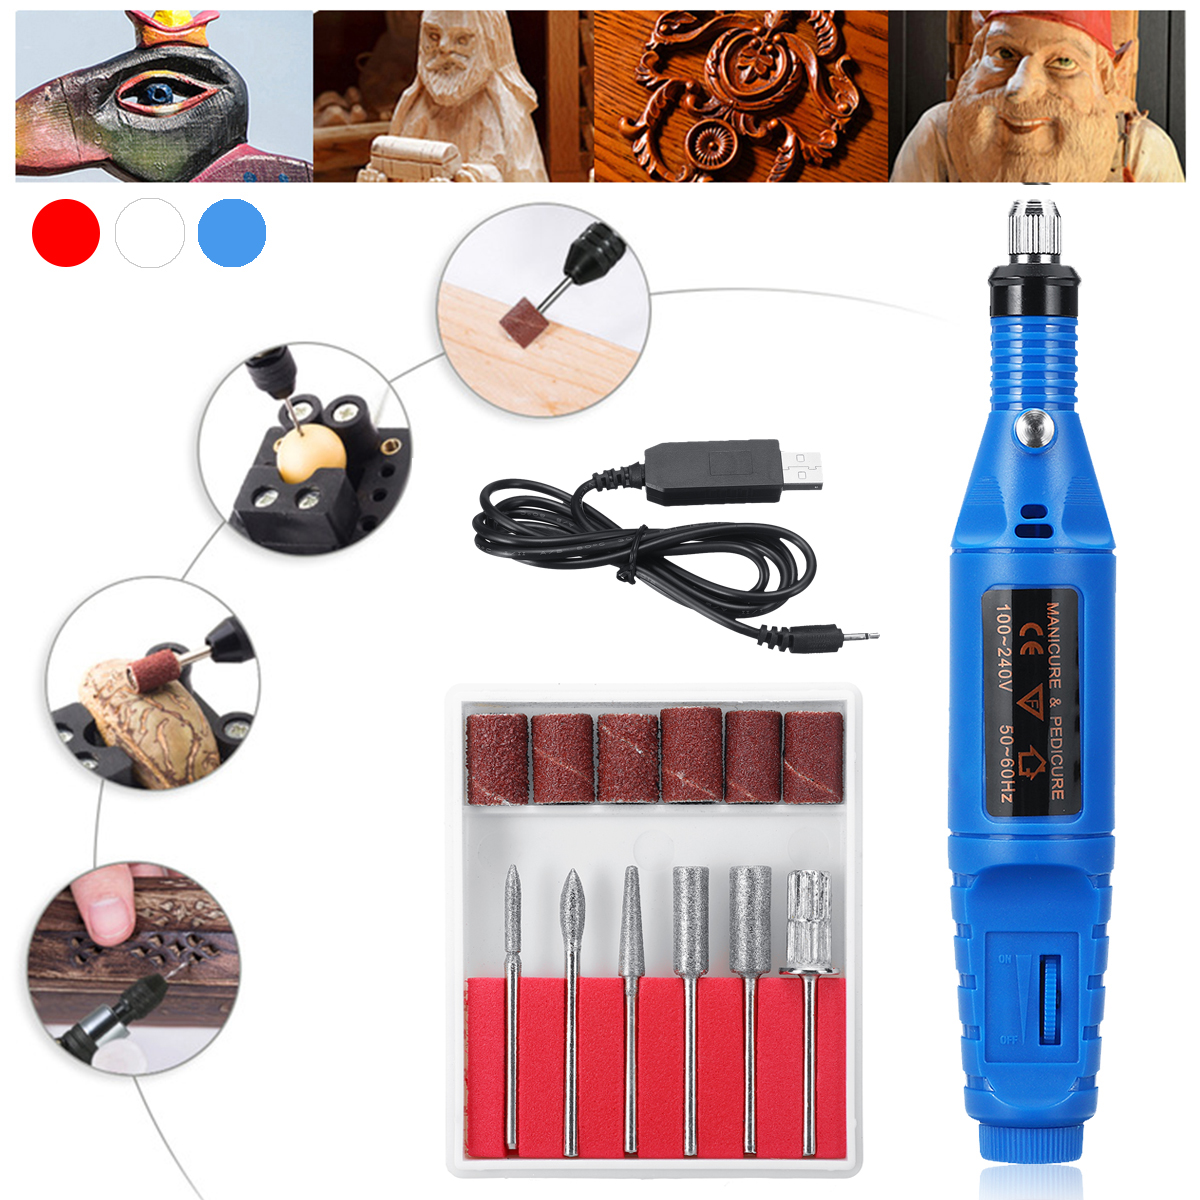 USB-Mini-Electric-Grinder-Engraving-Pen-Milling-Rotary-Drill-Grinder-Tool-Milling-Polishing-Drilling-1442450-5